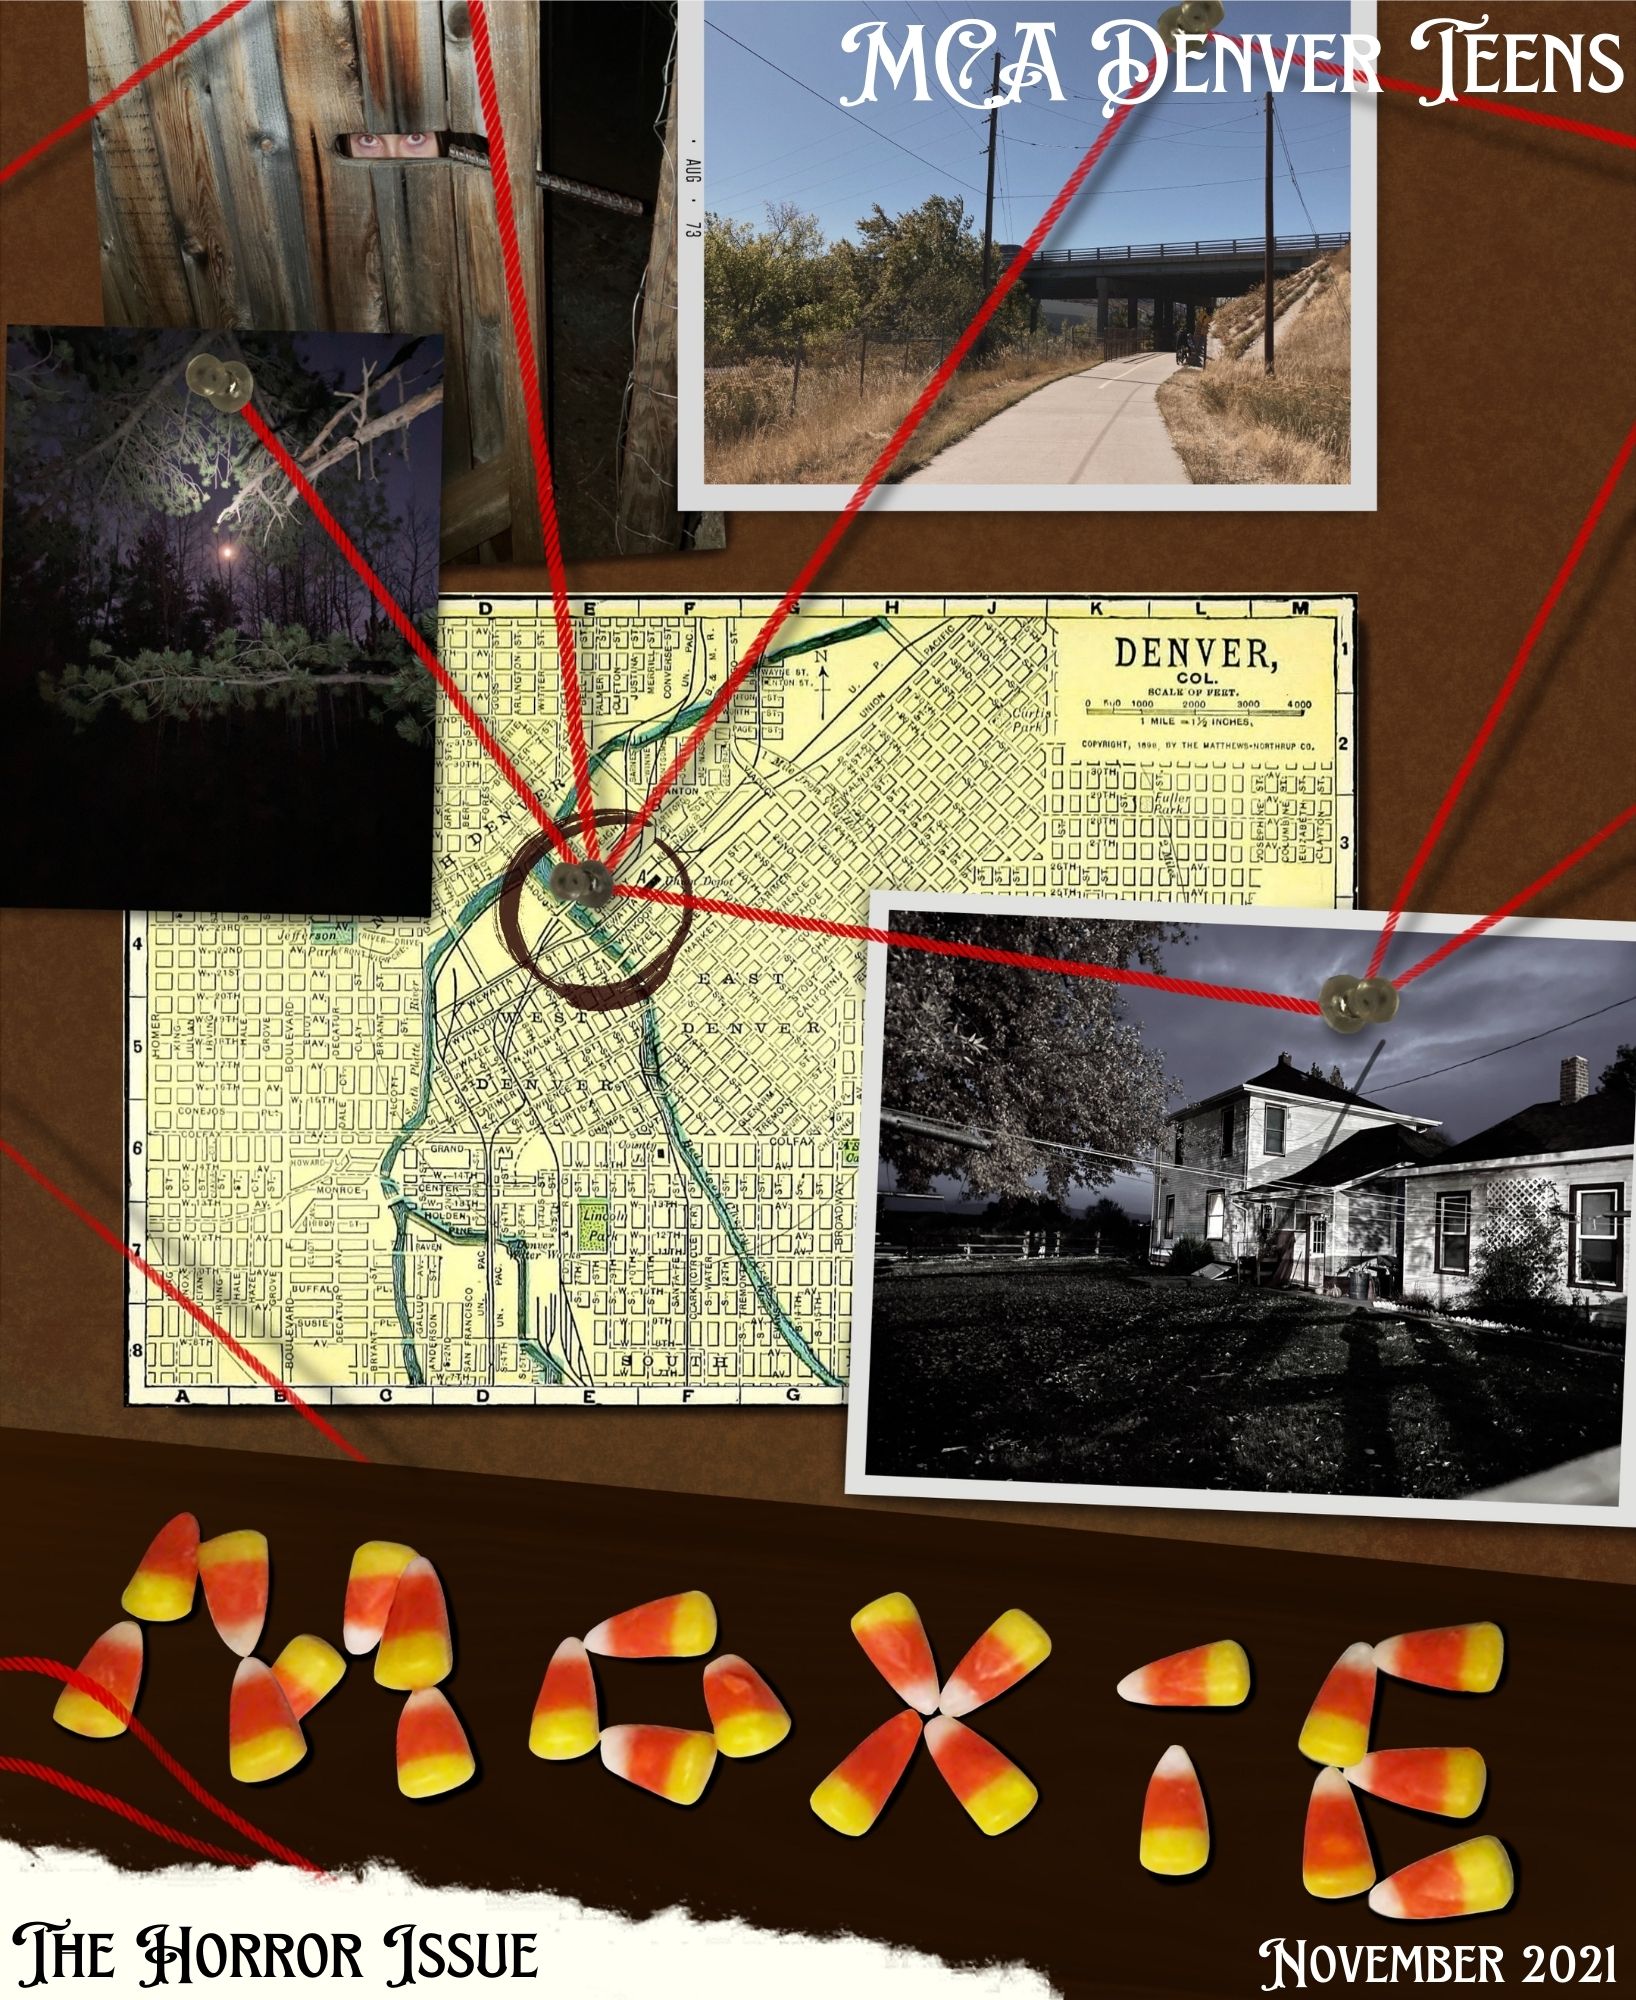 Magazine cover that looks like a collage of media from different sources, pinned to a pinboard and interconnected with string to mark connections. There’s a map of Denver, spooky images of trees and a house, and candy corn that spells “Moxie”. 